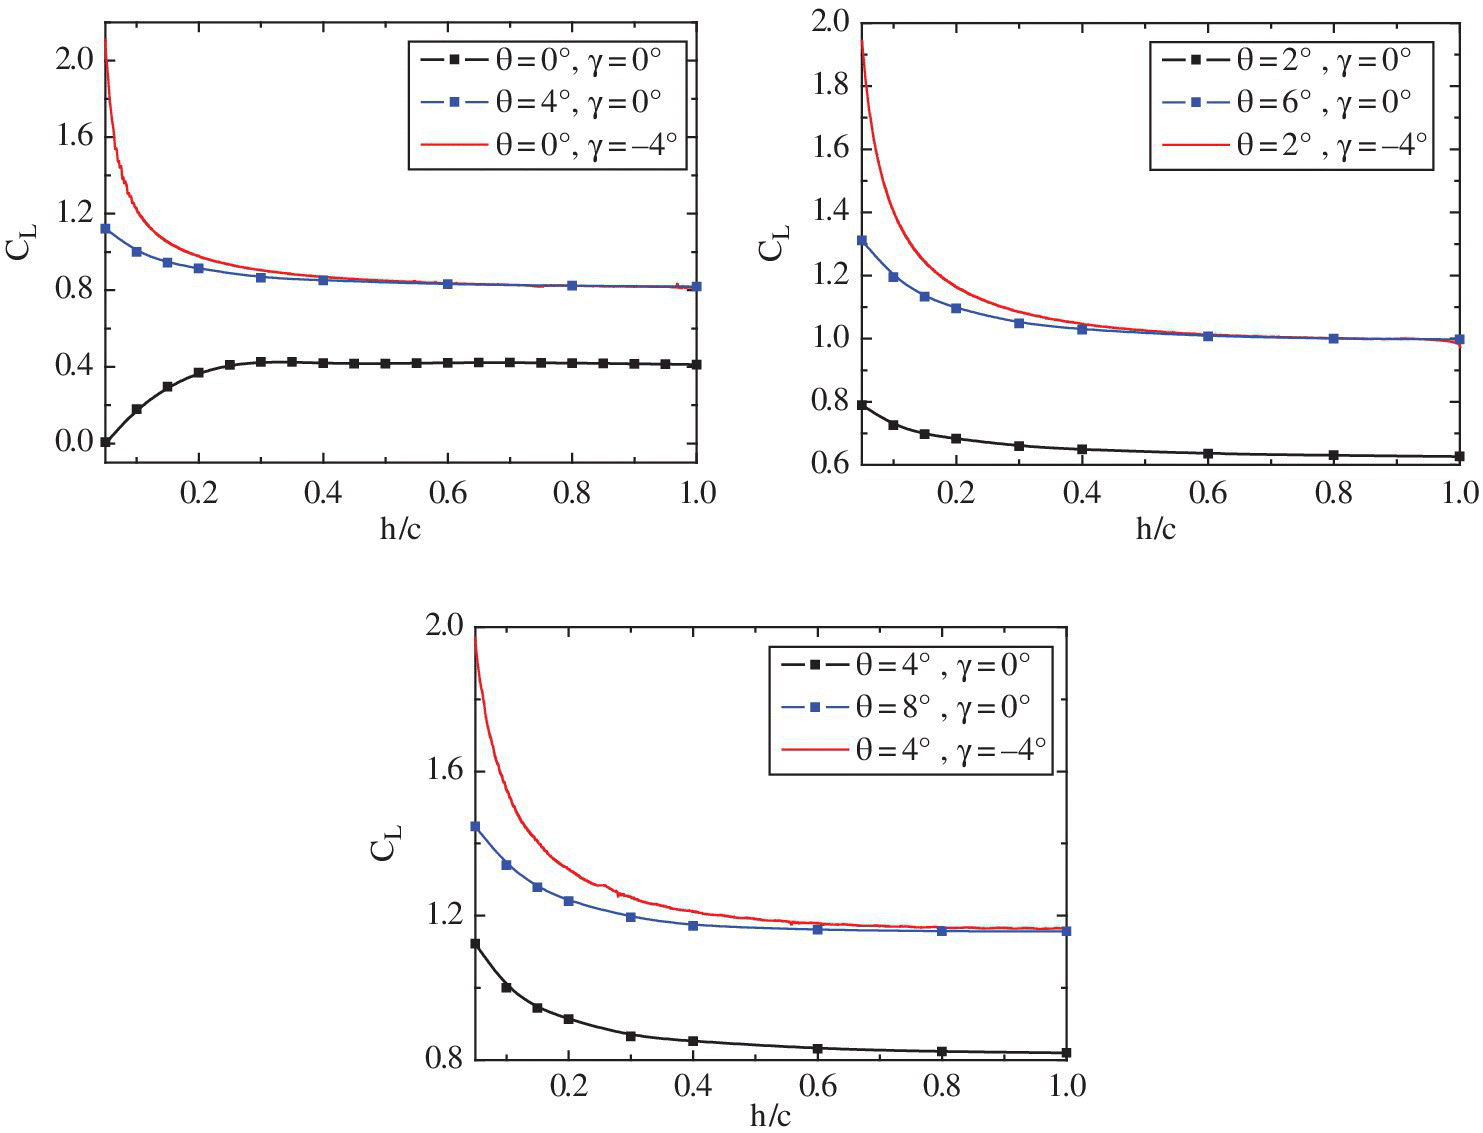 Three graphs illustrating the variation of CL with ride height for various values of θ and γ = 0 and −4°, with curves and markers.